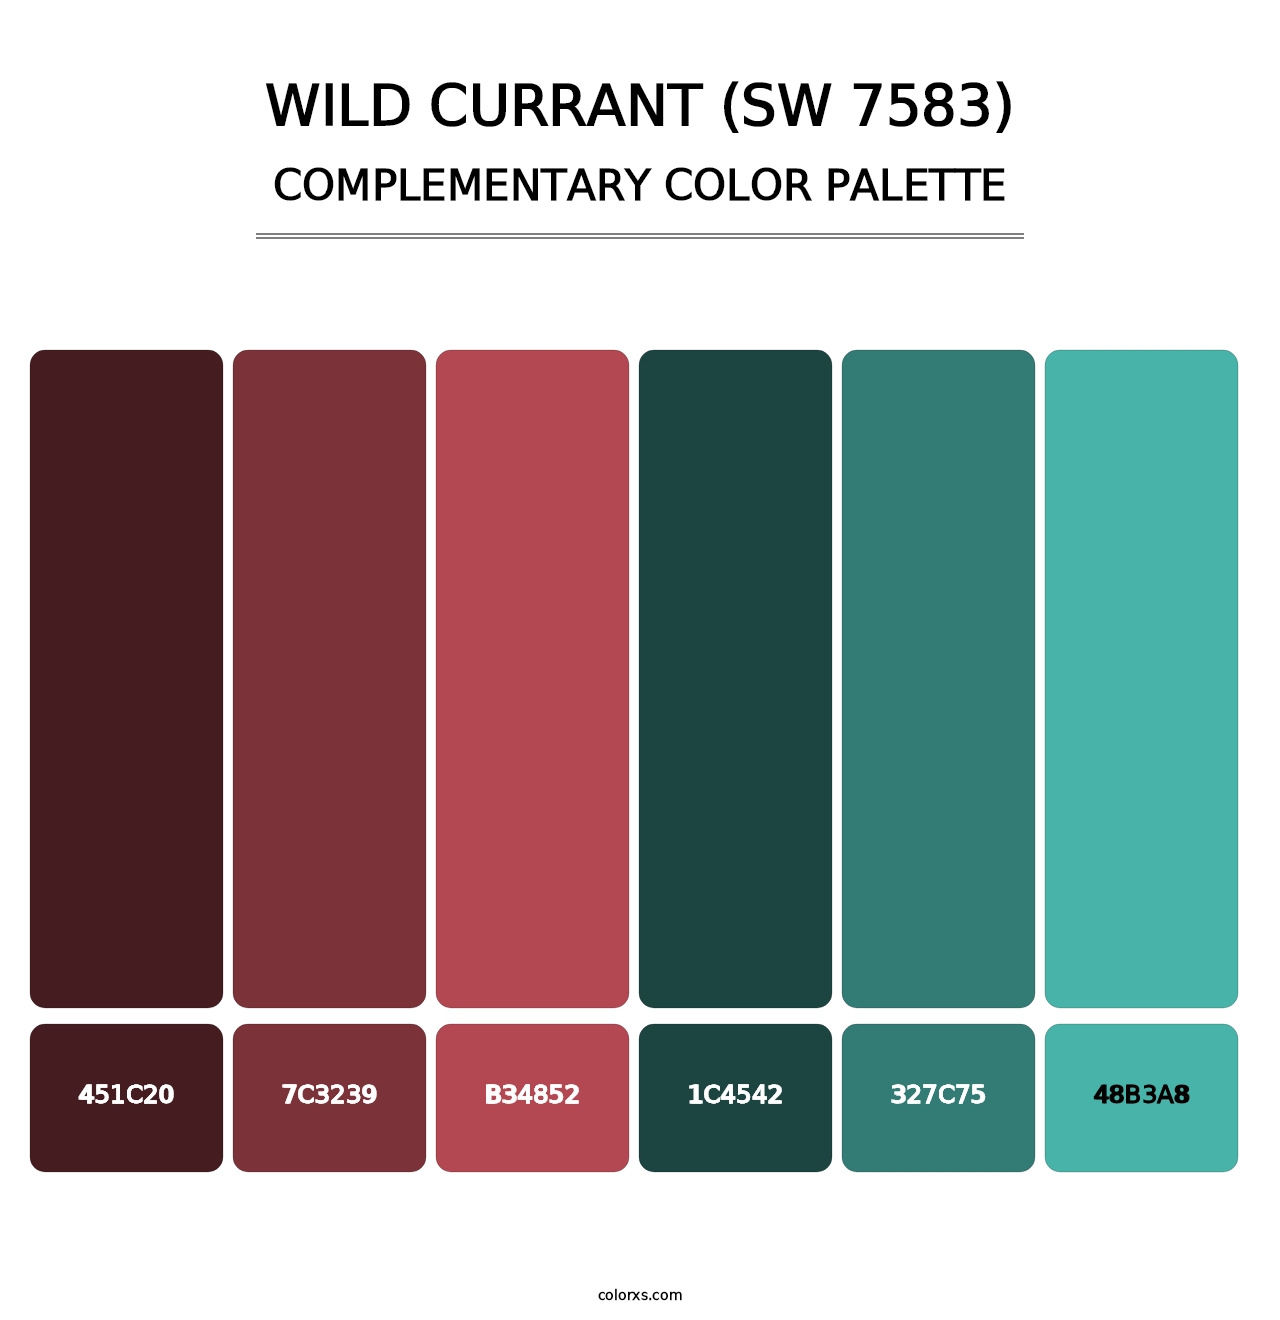 Wild Currant (SW 7583) - Complementary Color Palette